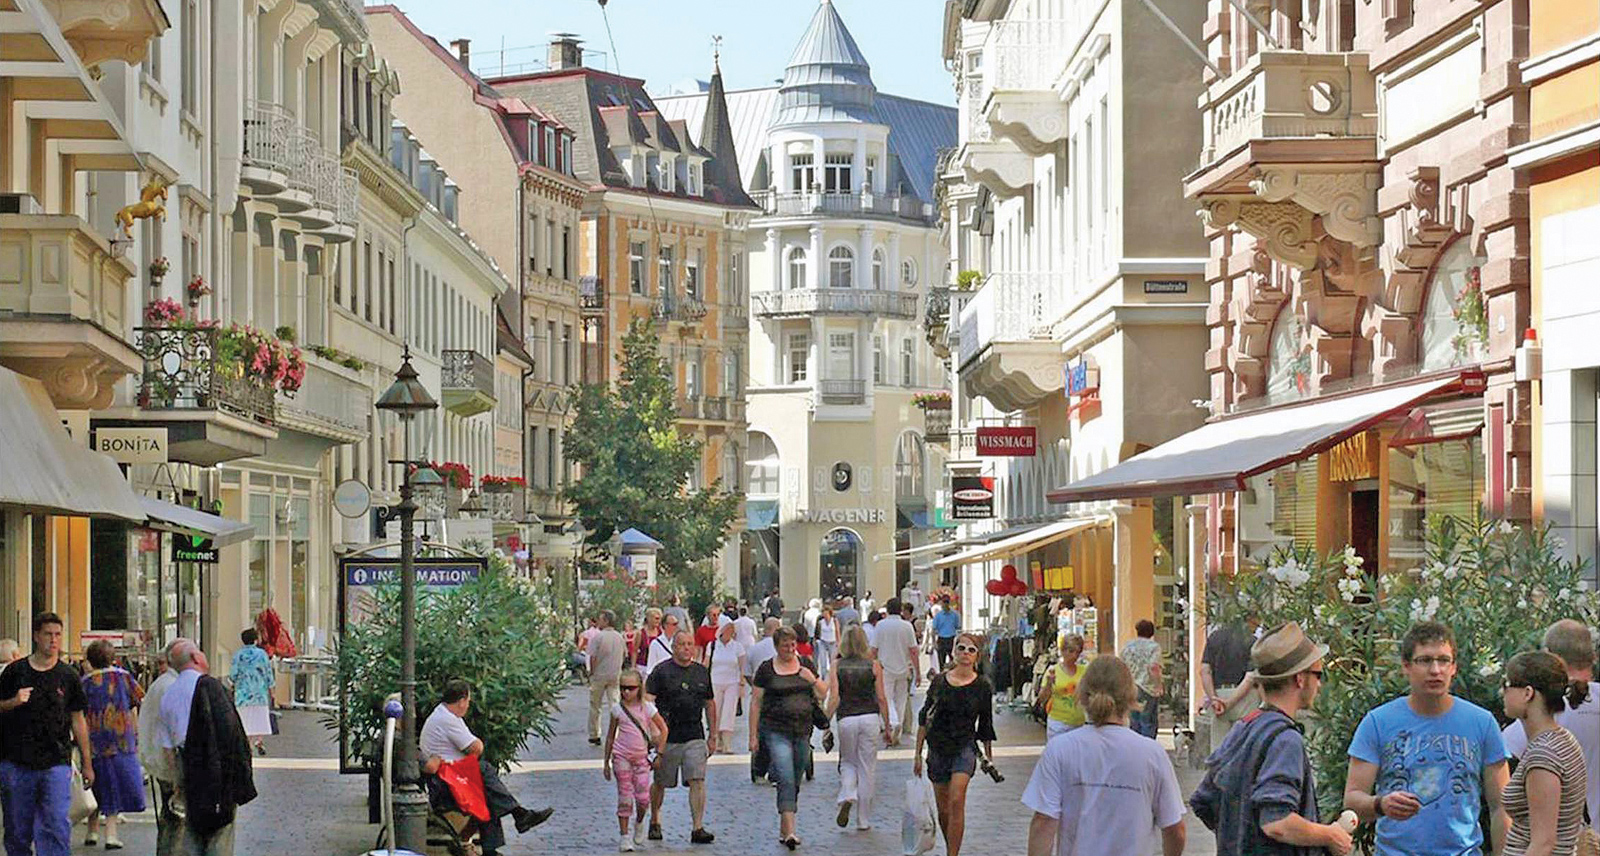 The narrow streets of Baden-Baden's Neo Baroque old town are home to a number of exclusive fashion boutiques, jeweller's and antiques shops